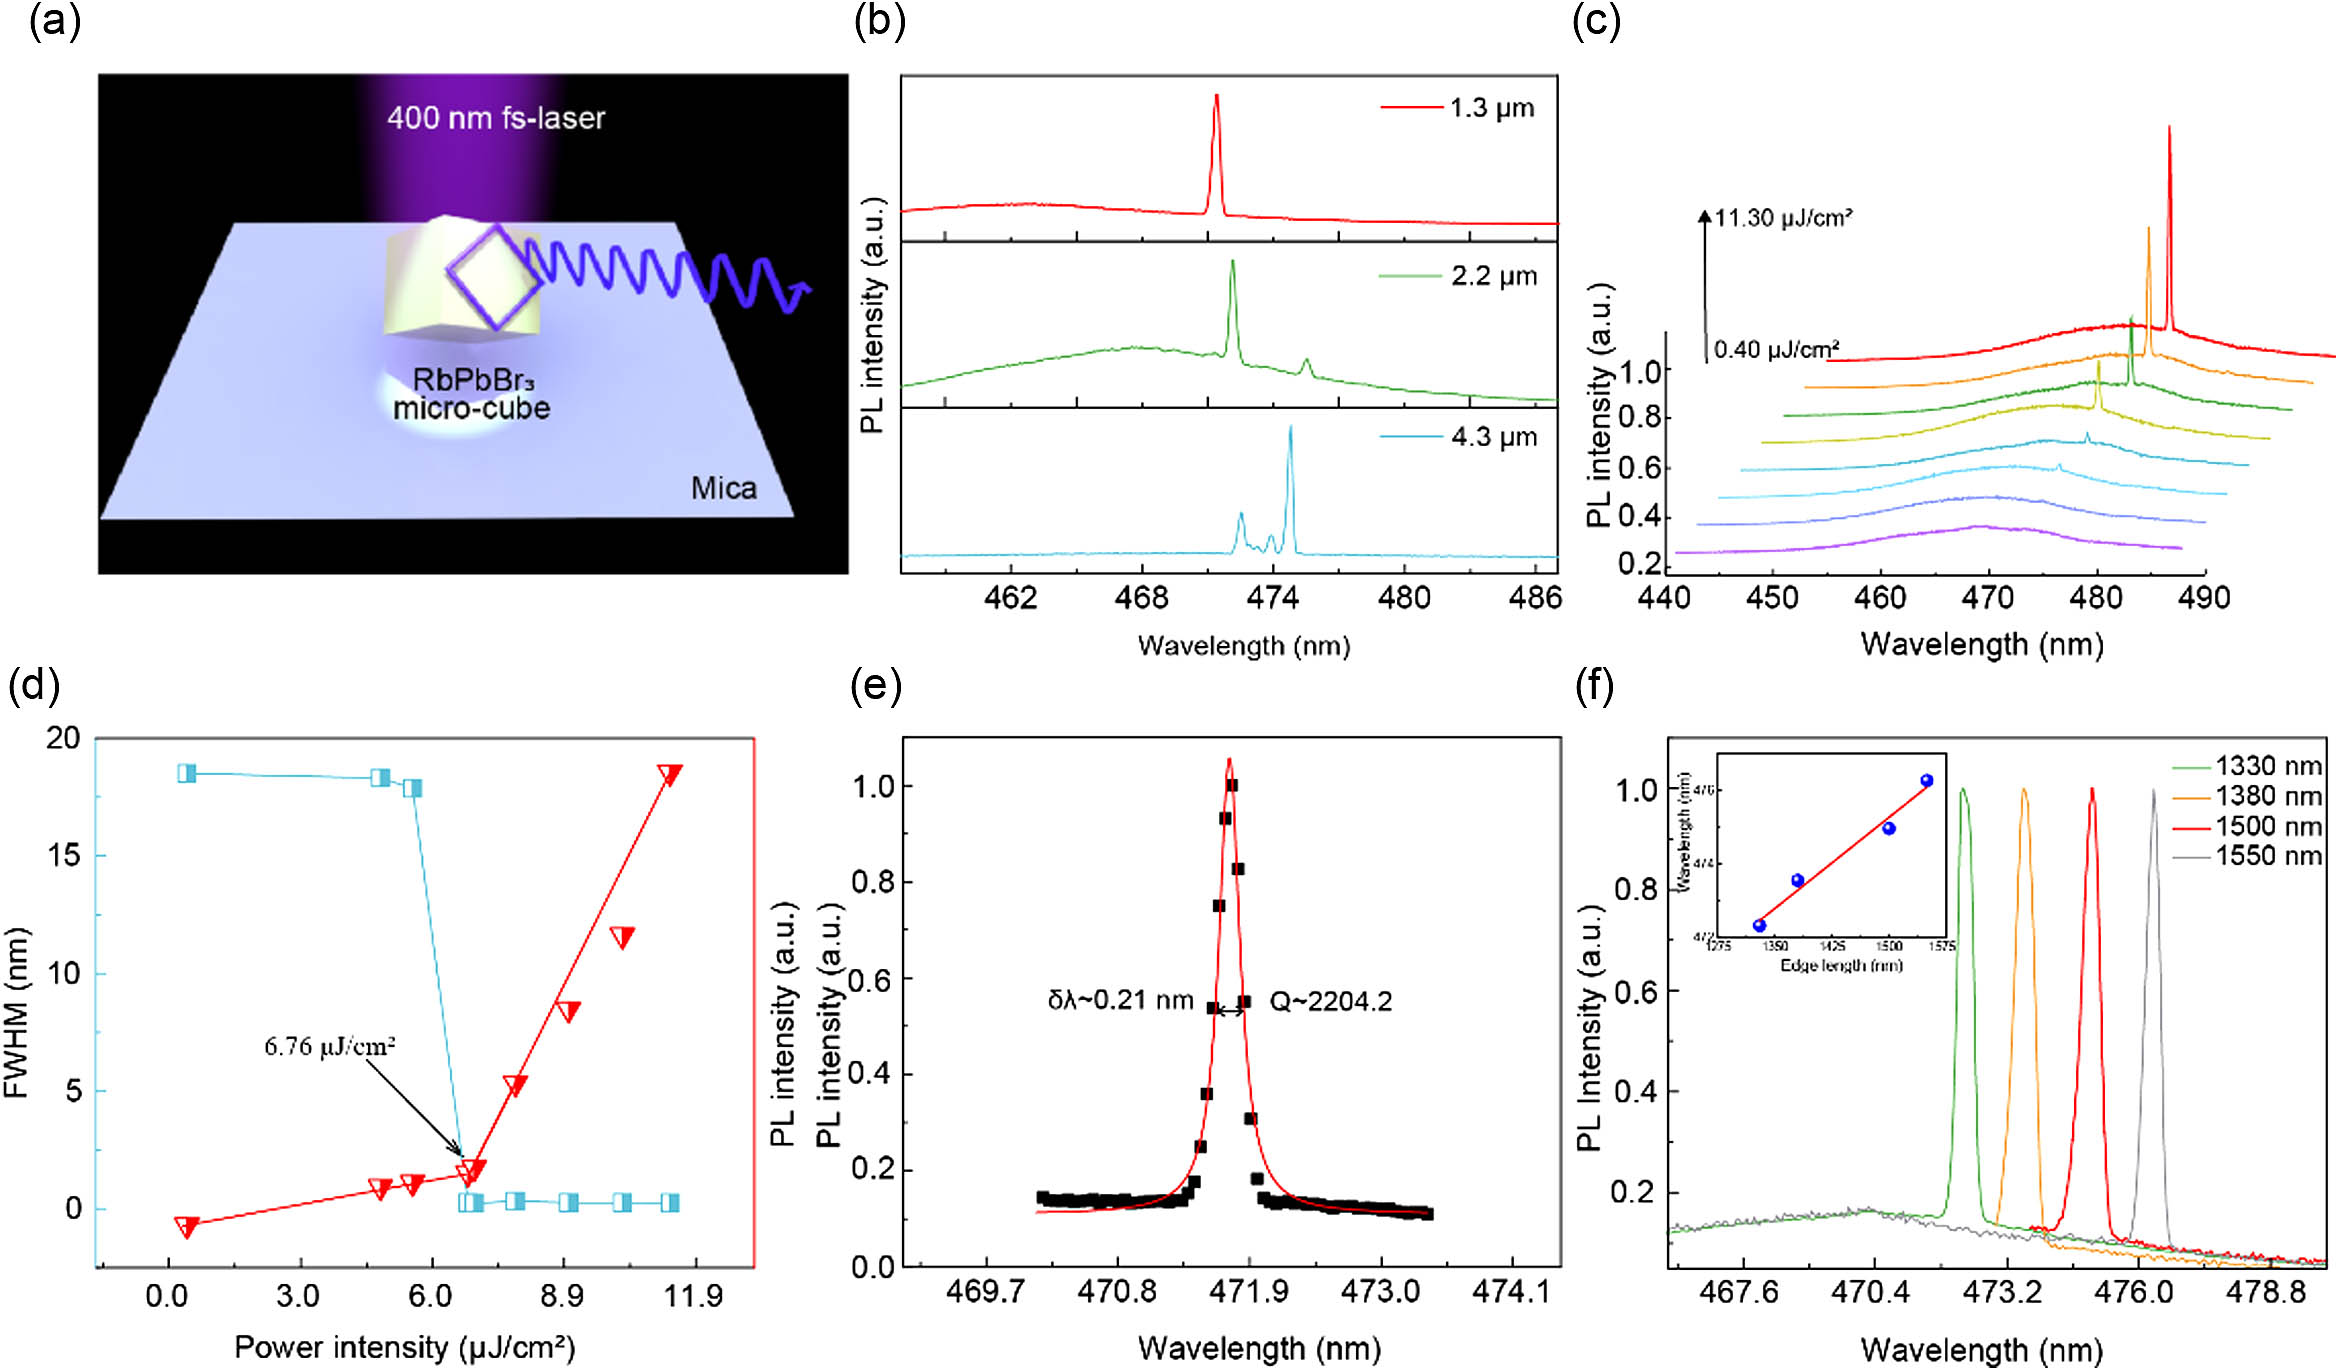 Single-mode lasing characteristics of RbPbBr3 MCC lasers. (a) Individual RbPbBr3 MCC pumped by a 400 nm fs-laser (approx. 40 fs, 10 kHz). (b) Resonant optical modes of RbPbBr3 MCCs with different sizes. Single-mode lasing was achieved, and the spacing between two adjacent modes decreased with increasing cavity size. (c) Excitation power-dependent lasing spectra obtained from a single RbPbBr3 MCC. (d) Output intensity (red) and FWHM (blue) as a function of the pump intensity. The integrated lasing intensity as a function of the pumping density obtained from the RbPbBr3 MCC indicates that the lasing threshold Pth is 6.76 μJ/cm2. (e) Lorentz fitting of a lasing oscillation mode at 471.7 nm, yielding an ultrasmall linewidth of ≈2200, corresponding to a high Q-factor of ≈2200. (f) Single-mode lasing spectra of four RbPbBr3 MCCs with different sizes. Inset: relationship between the wavelength of single-mode lasing and the sizes of RbPbBr3 MCCs.